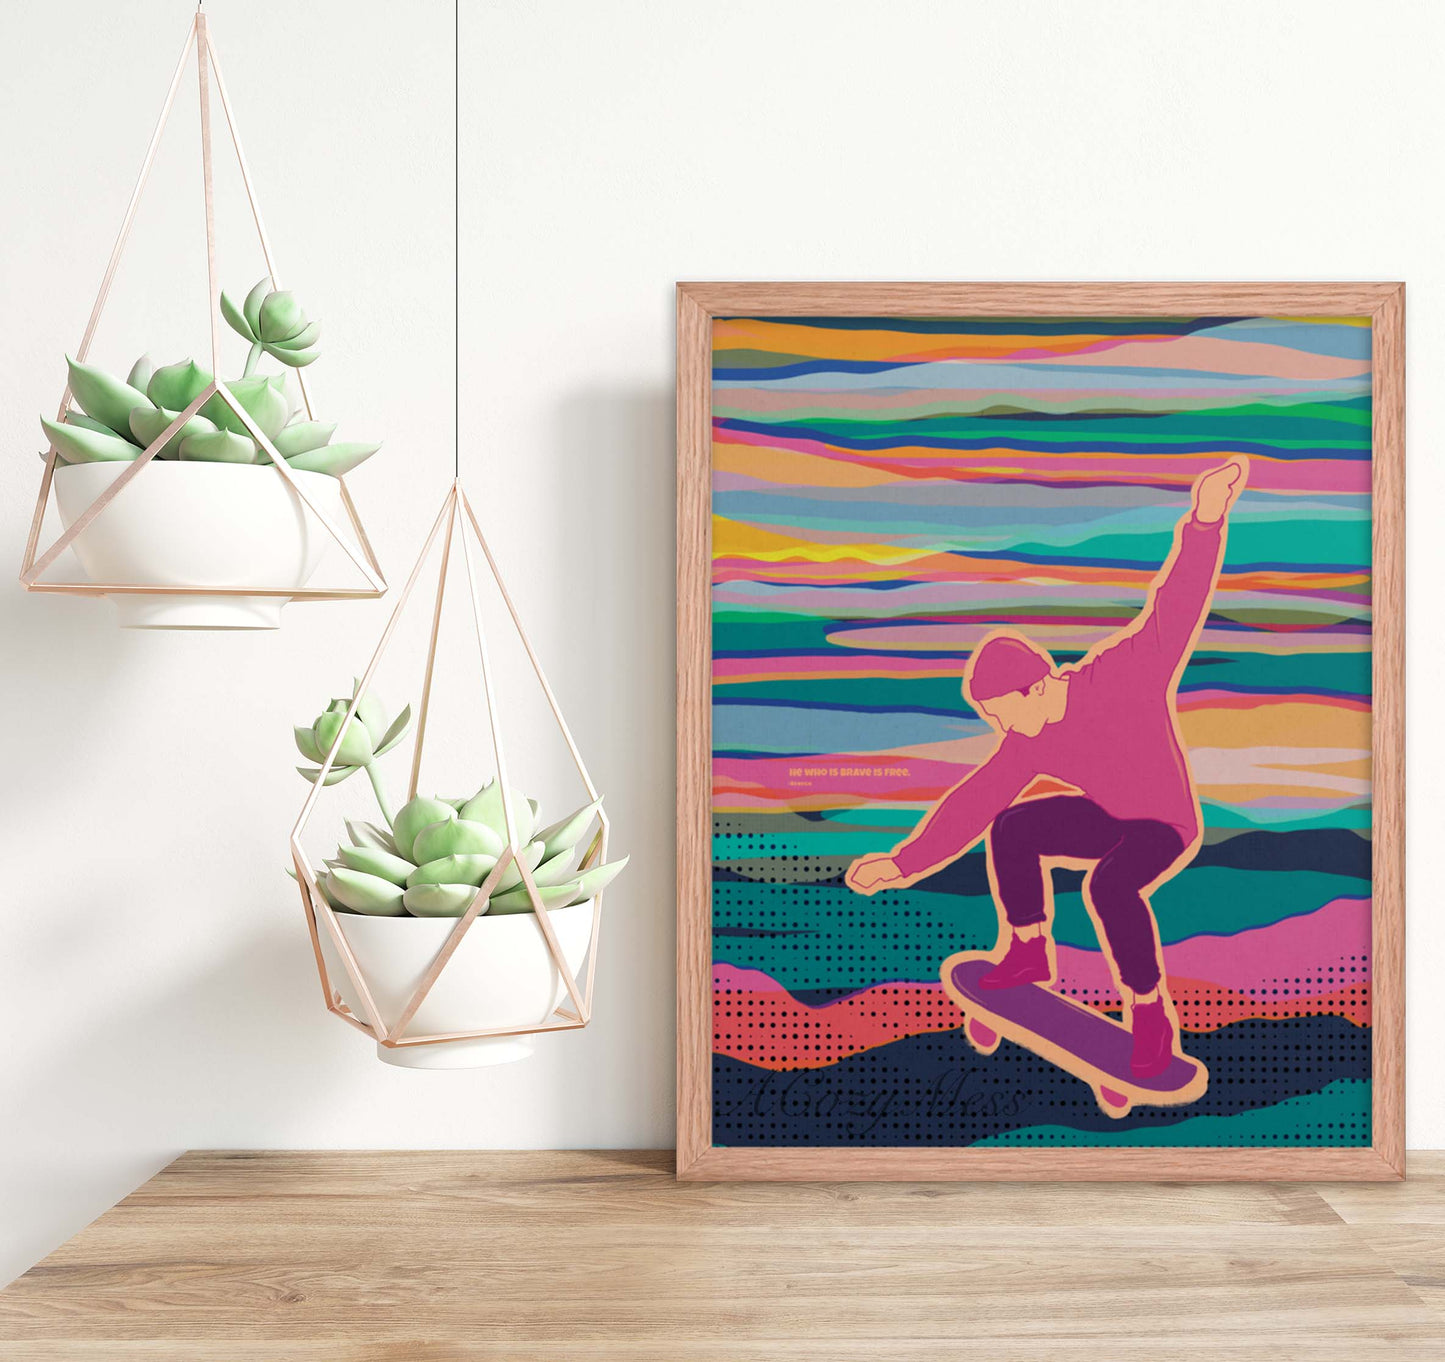 Vibrant & colorful skateboarder art with seneca quote " he who is brave is free" in oak frame